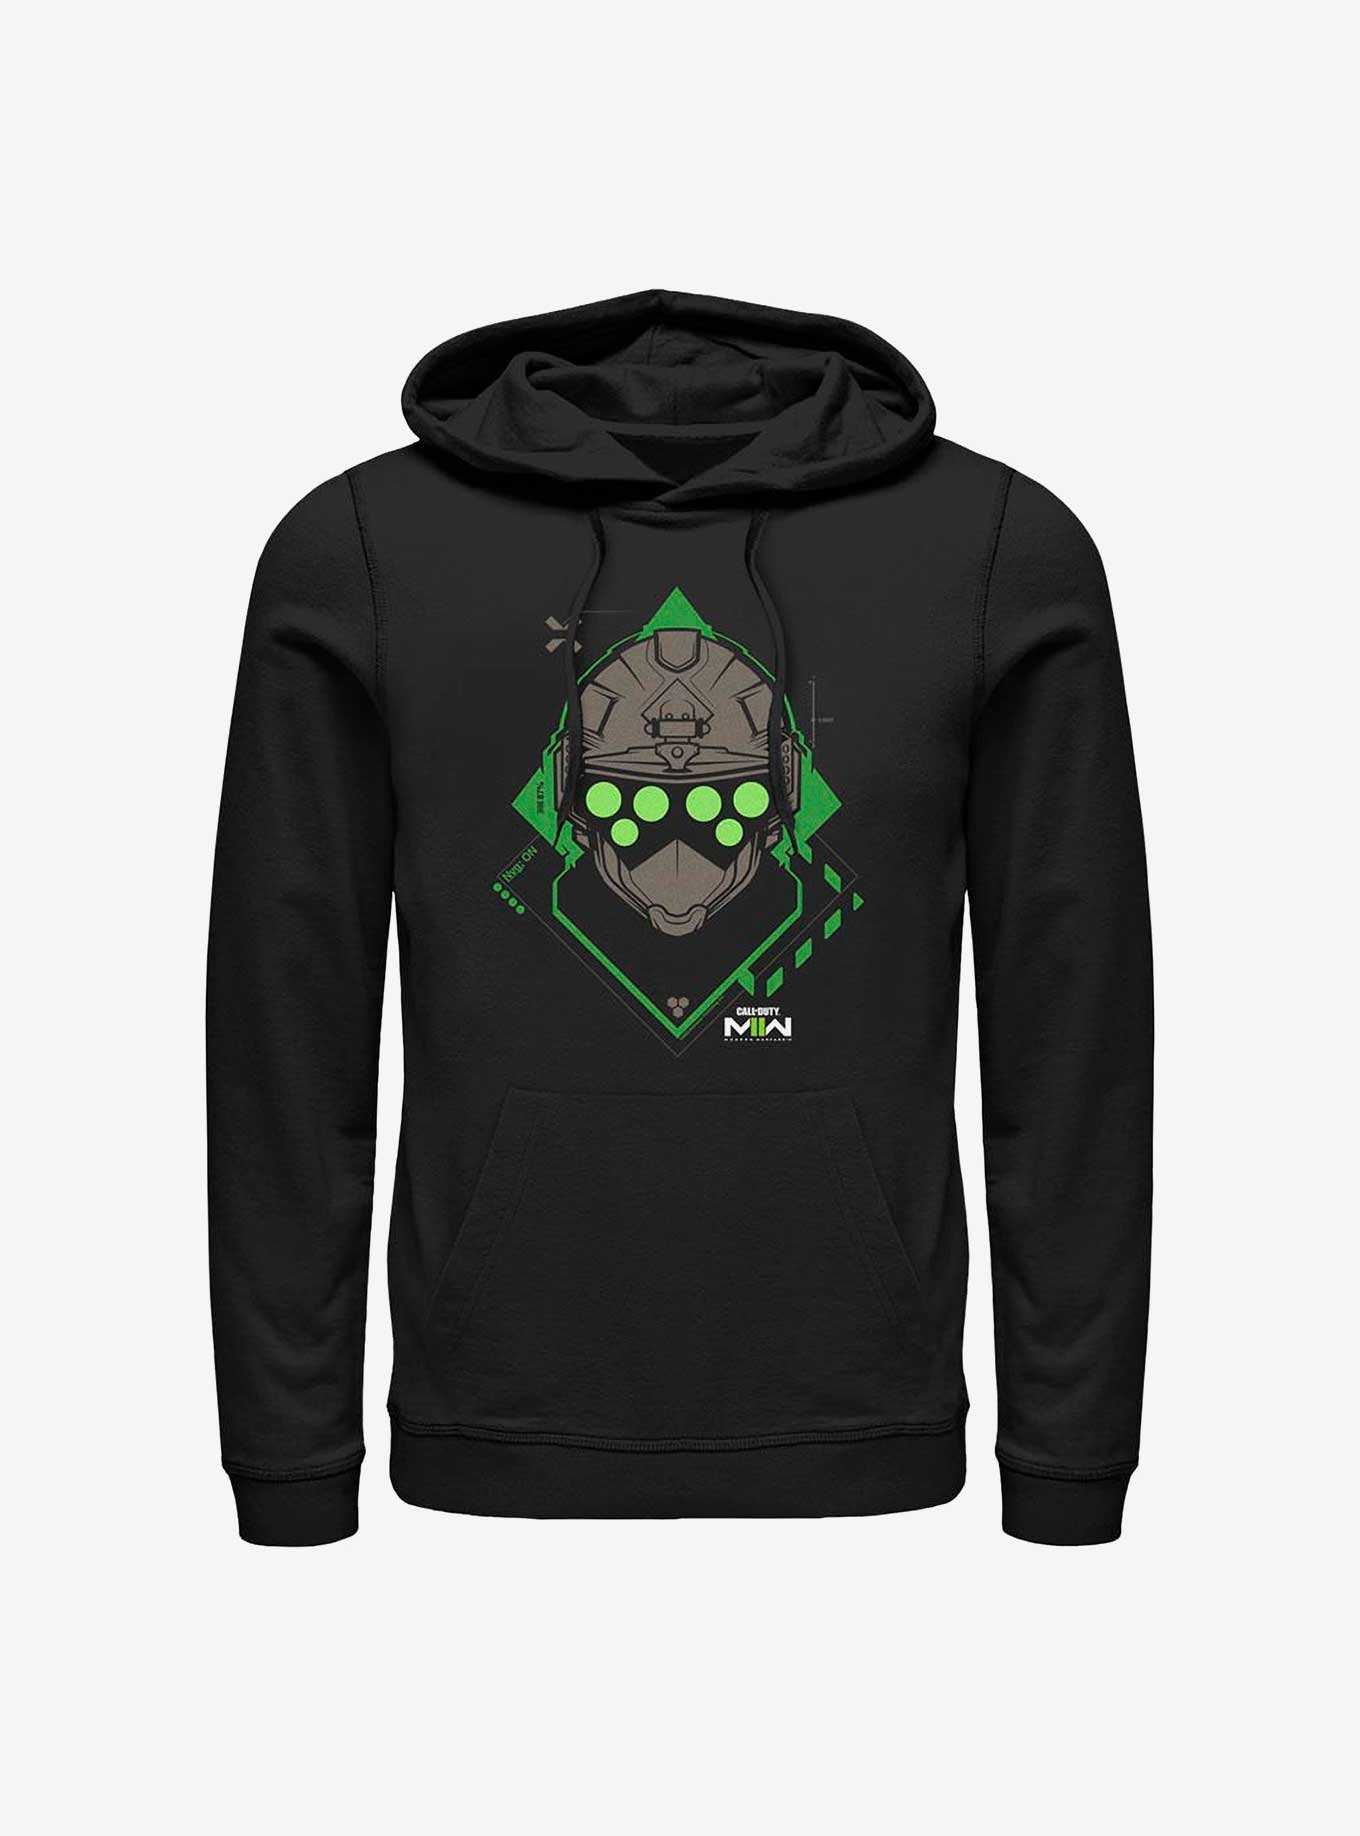 Call Of Duty Night Vision On Hoodie, , hi-res